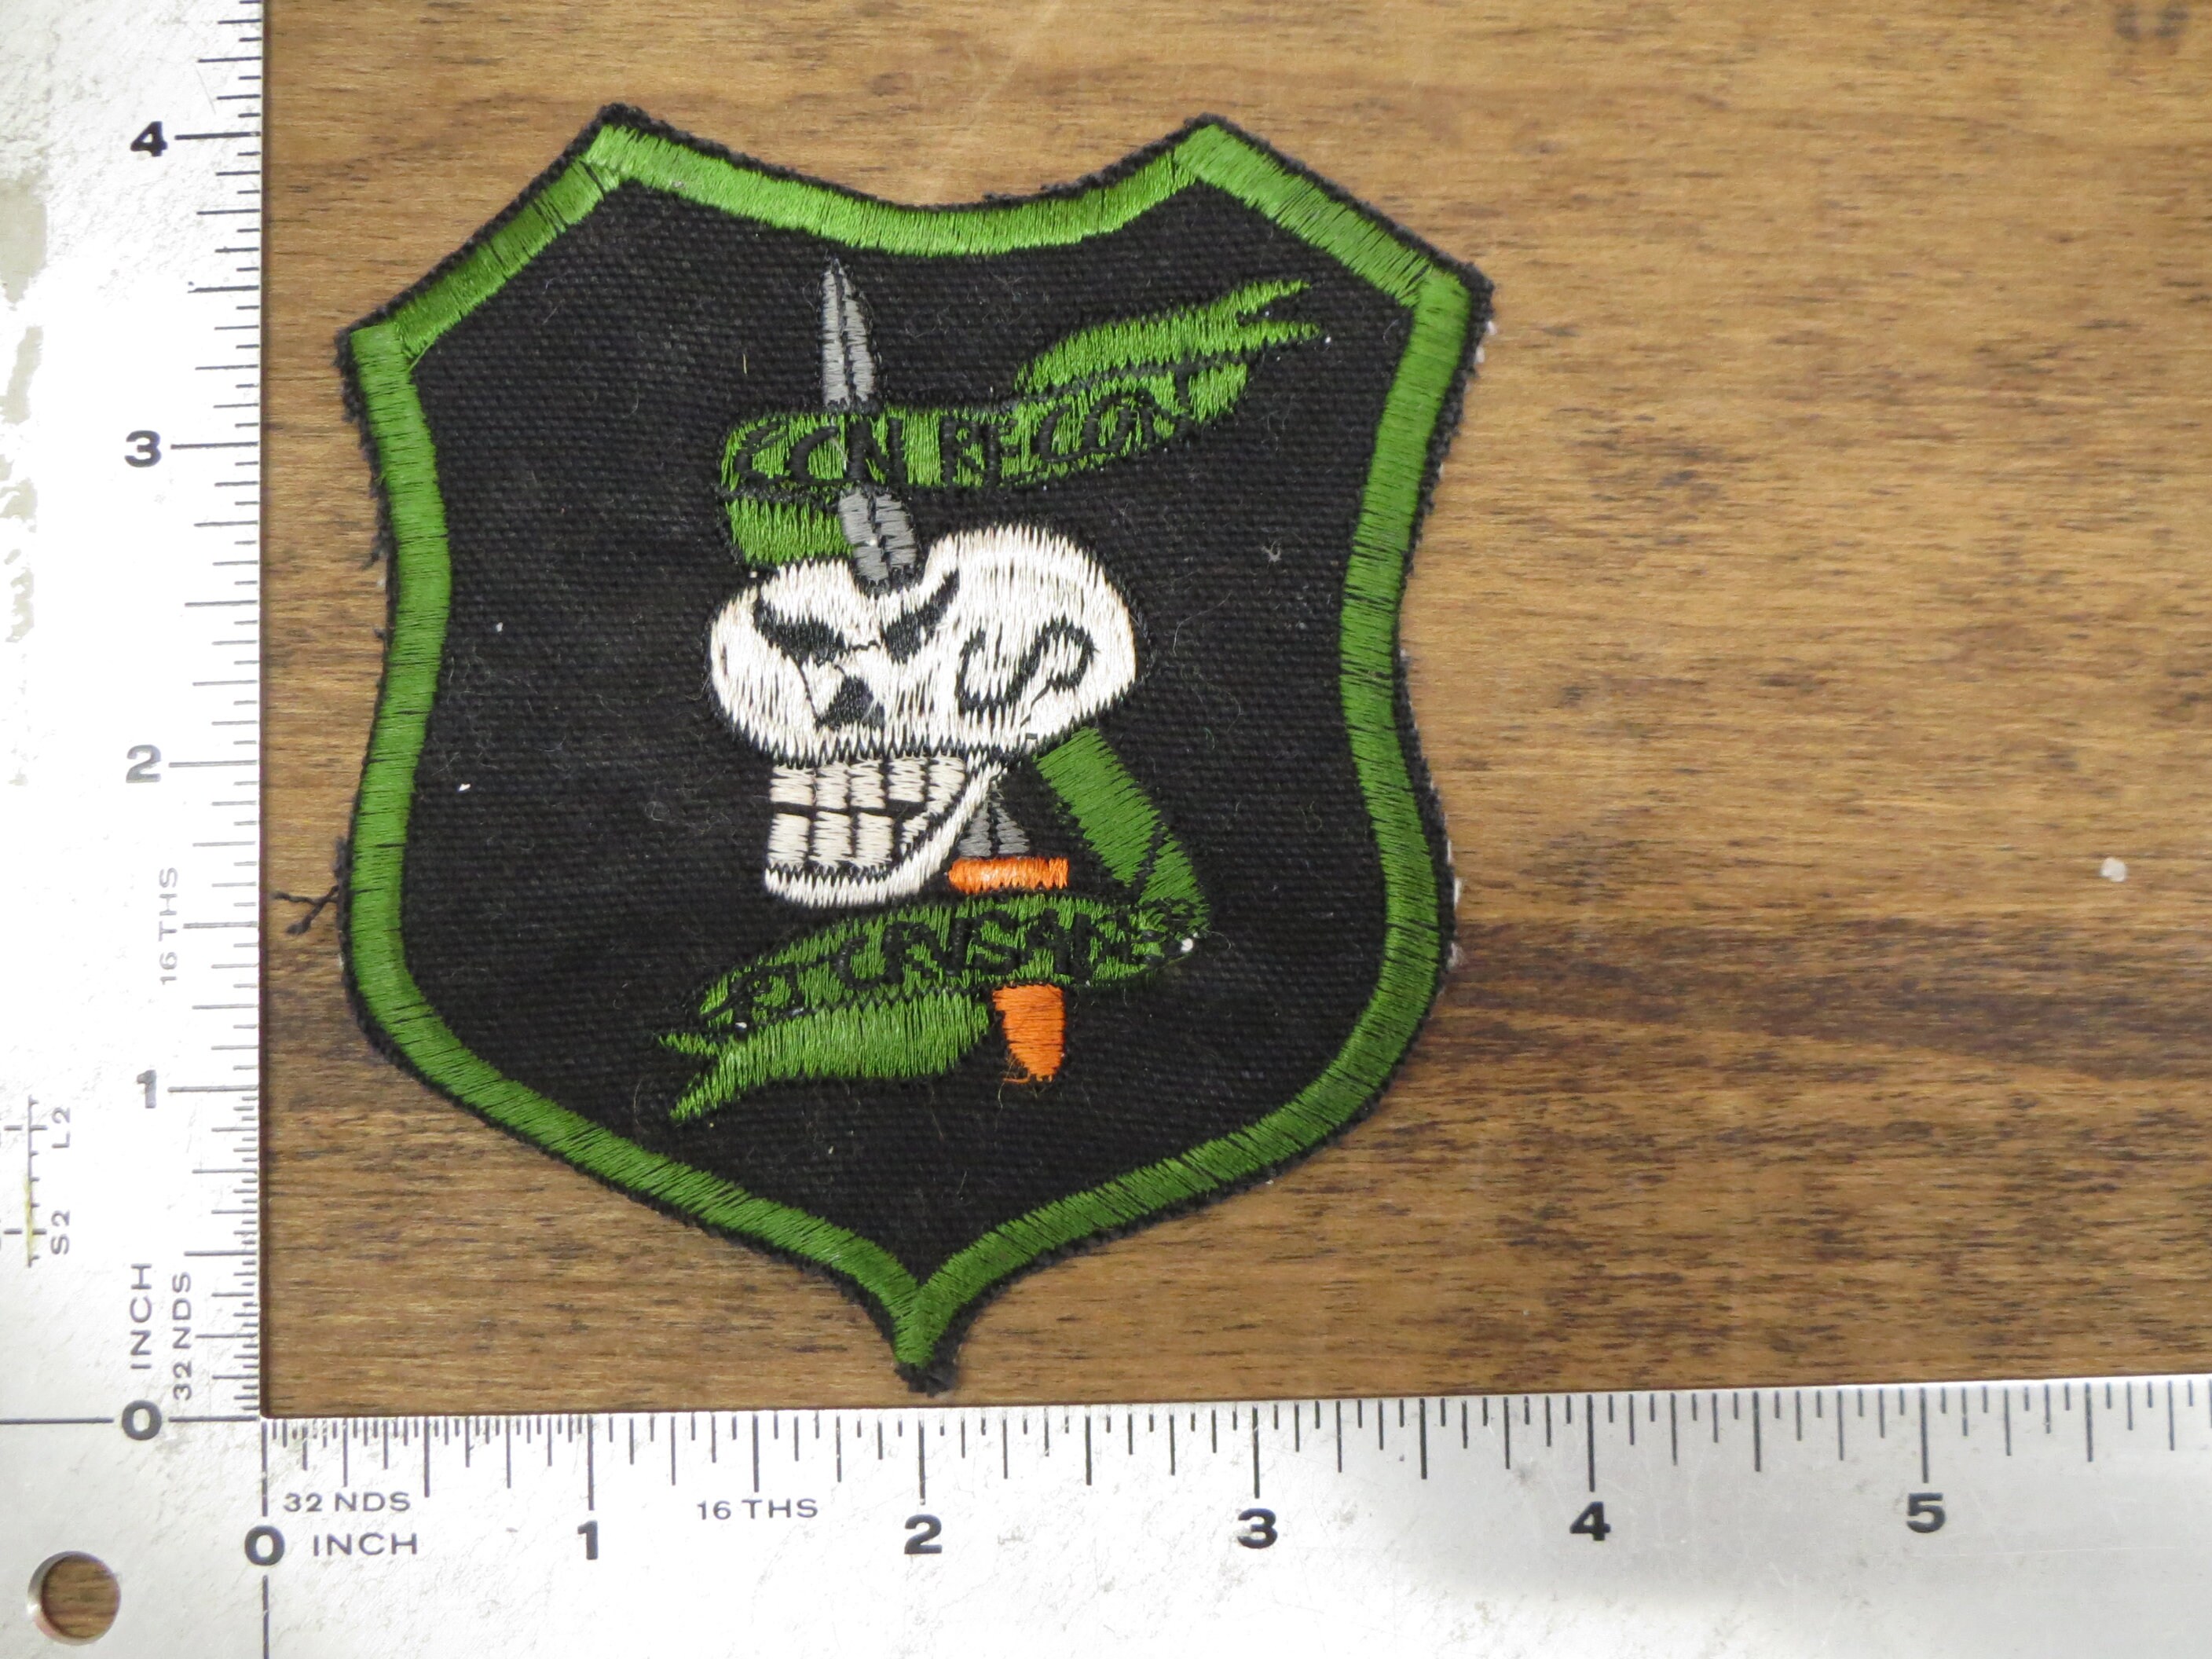 One Good Deal After Another USMC Marine Corps Patch 4' in Diameter 